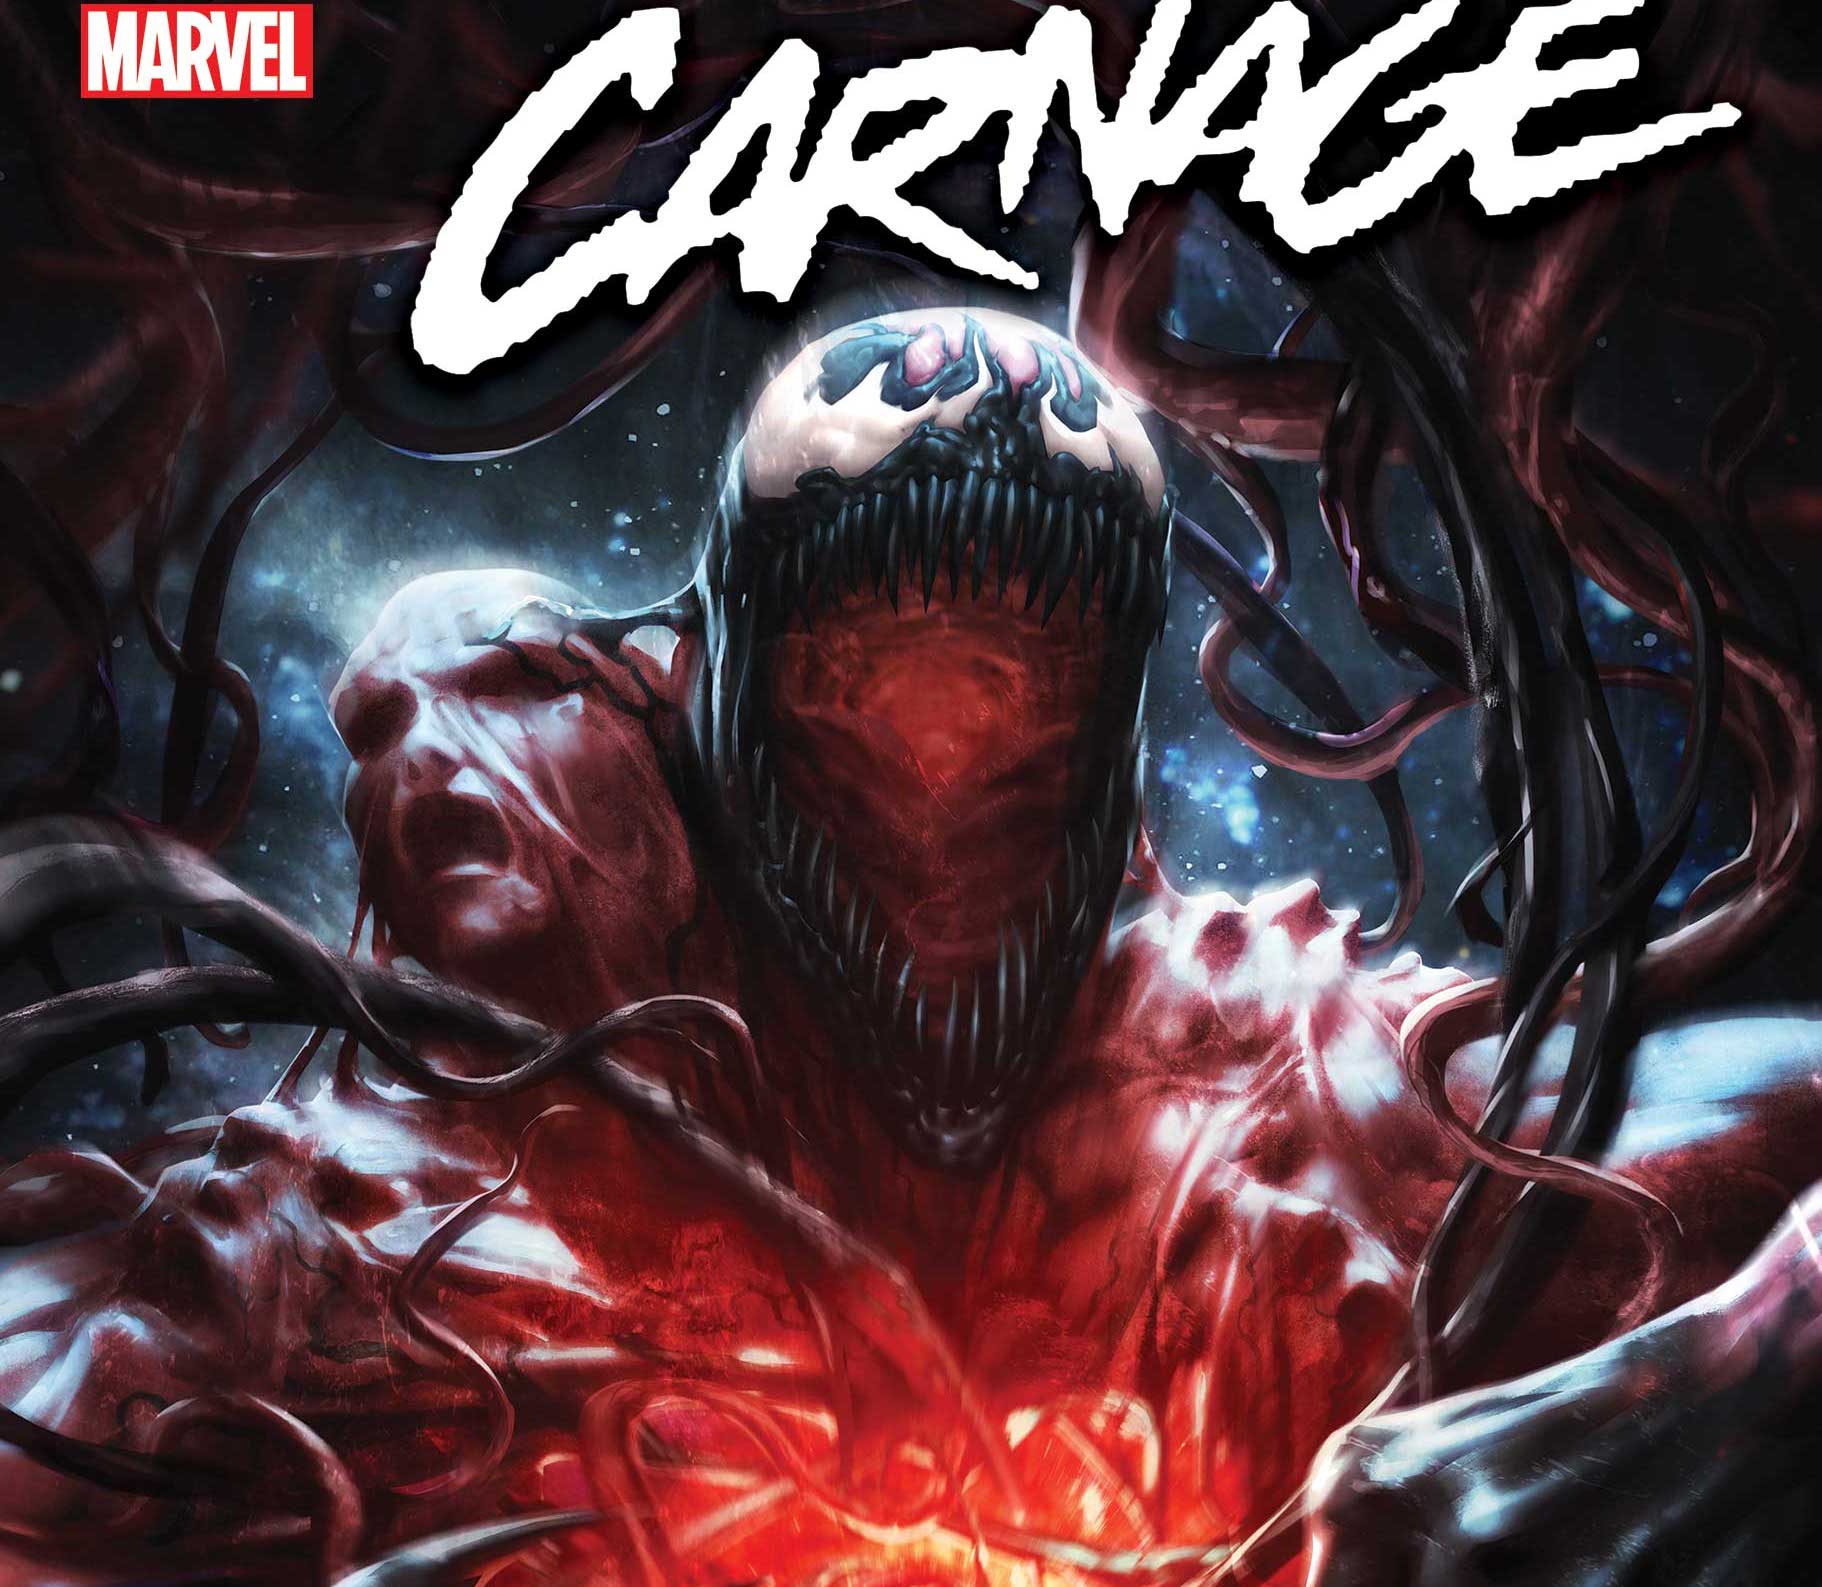 'Carnage' #3 is filled with motivations and answers too